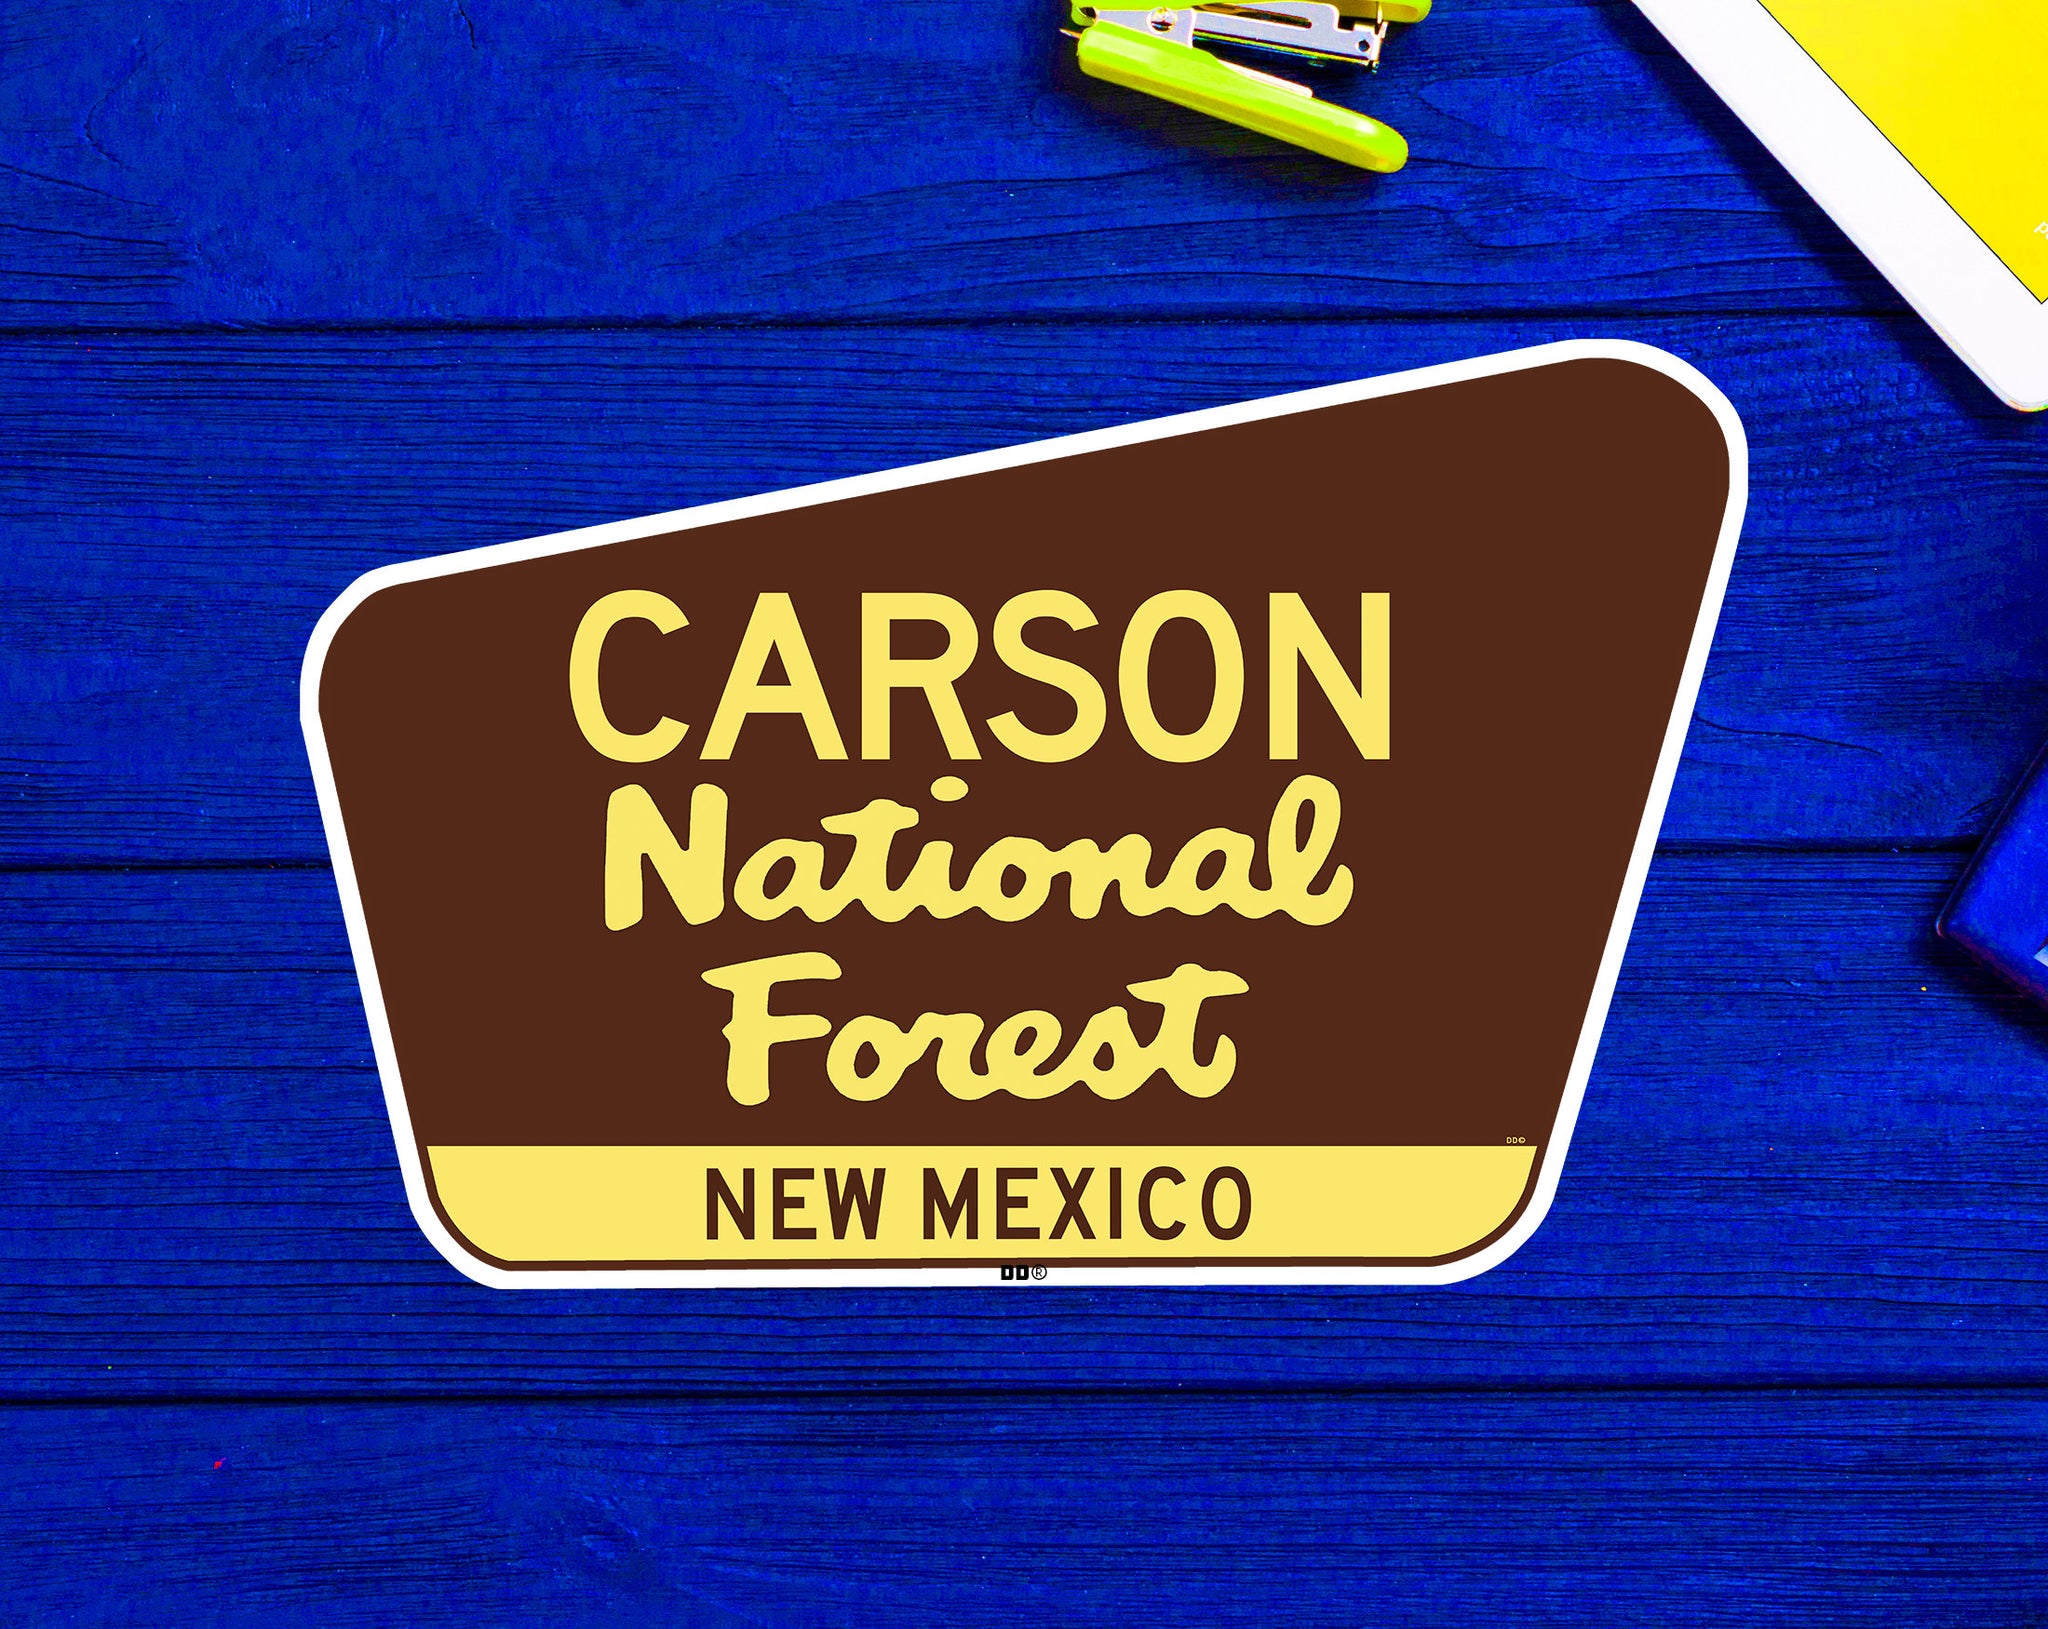 Carson National Forest Decal Sticker 3.75" x 2.5" New Mexico Vinyl